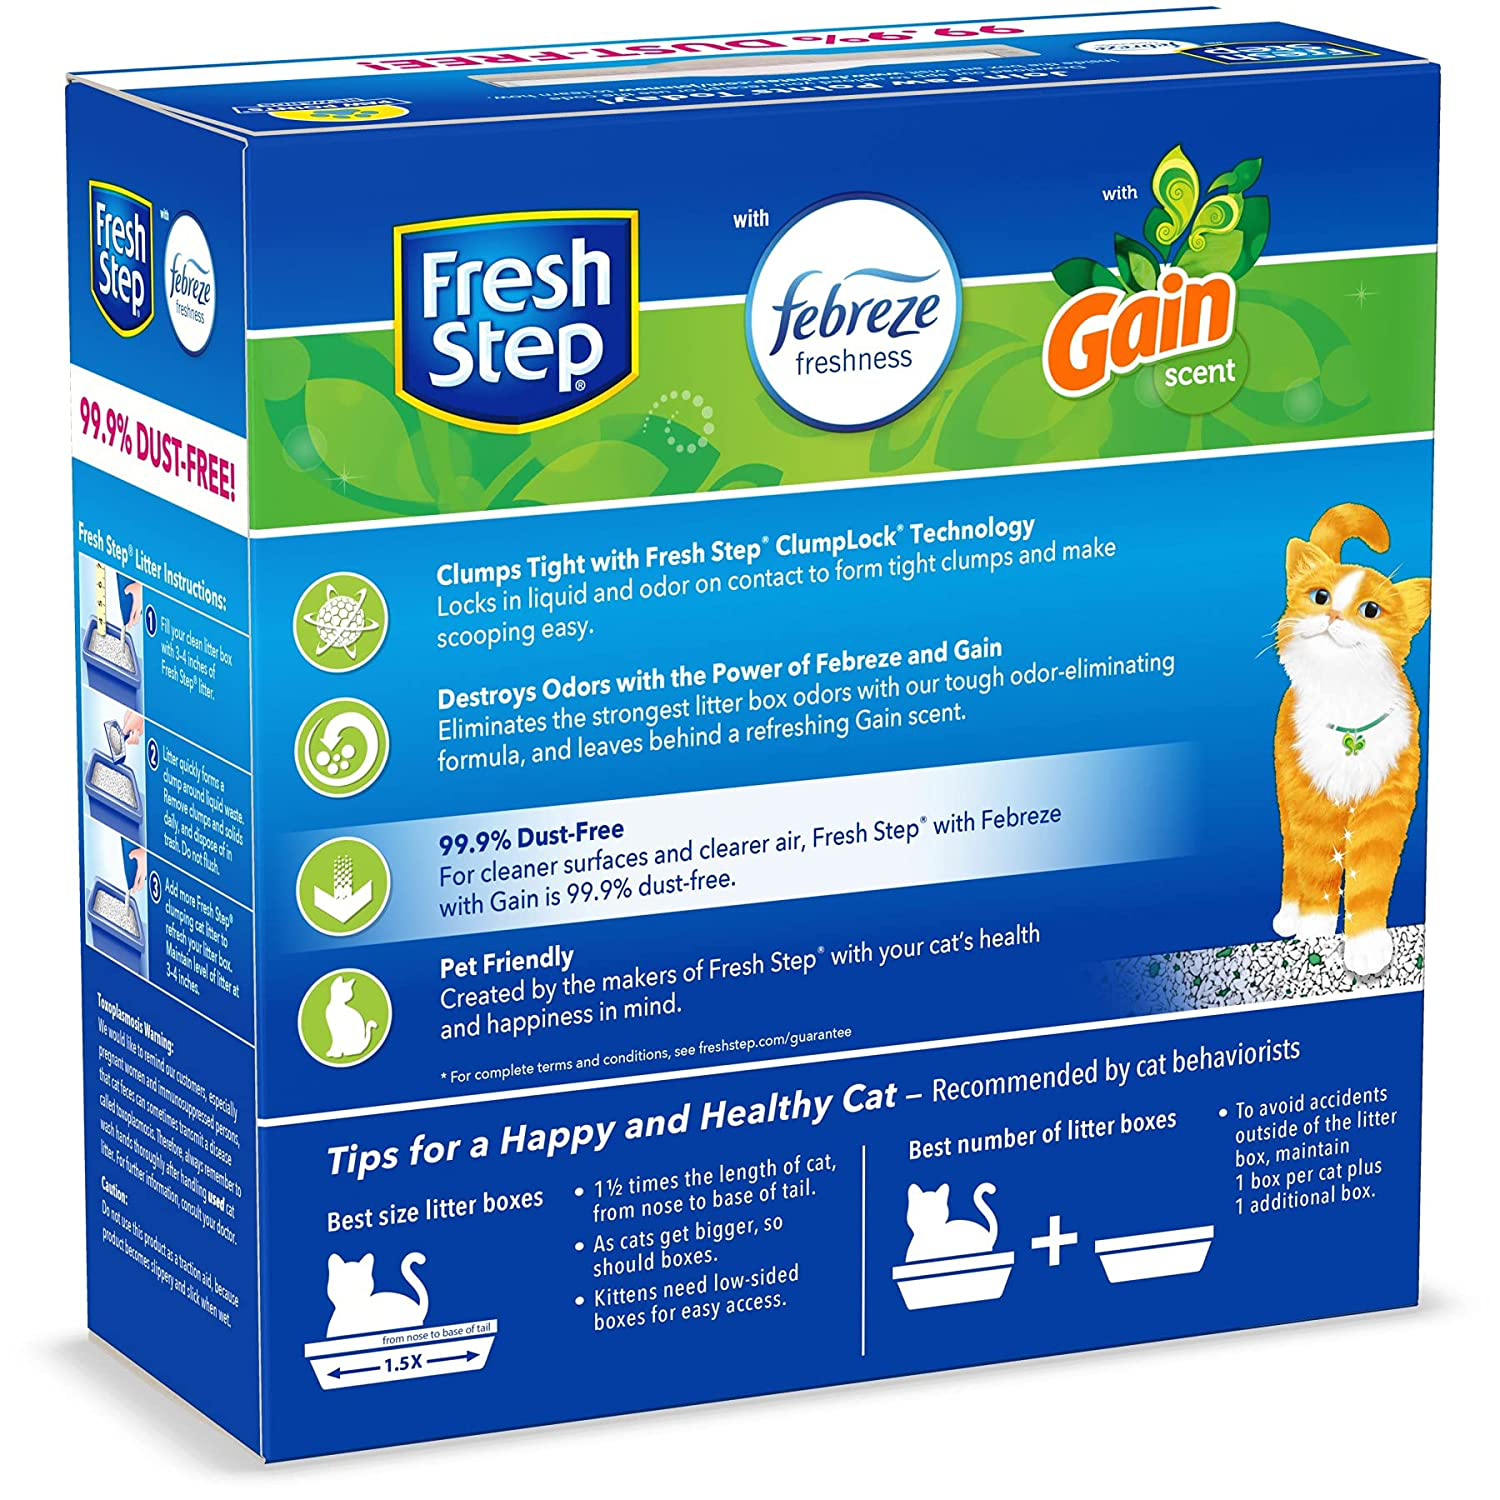 Fresh Step Cat Litter, Clumping Cat Litter with the Power of Febreze with Refreshing Scent 14 Lbs (Package May Vary) Gain, 224 Oz